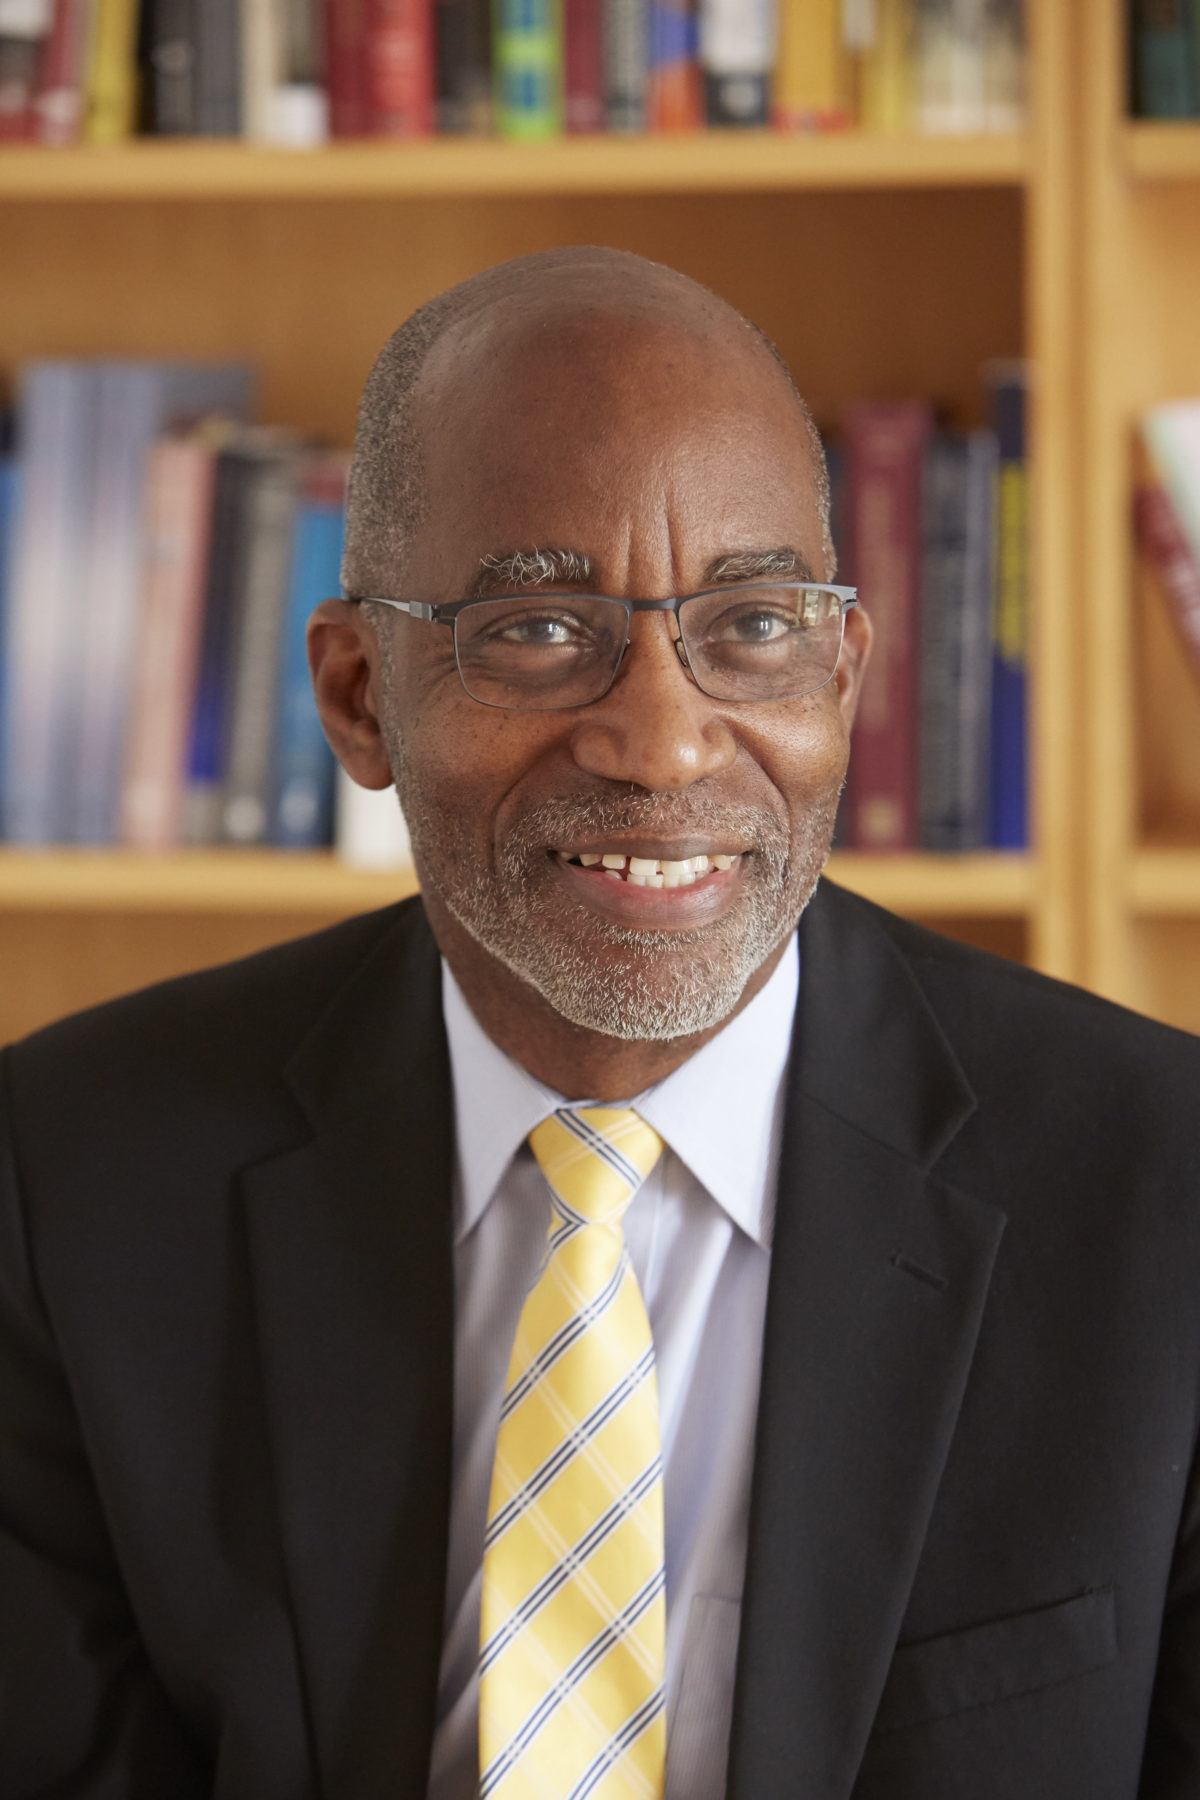 David R. Williams featured in The Verge and The Harvard Gazette